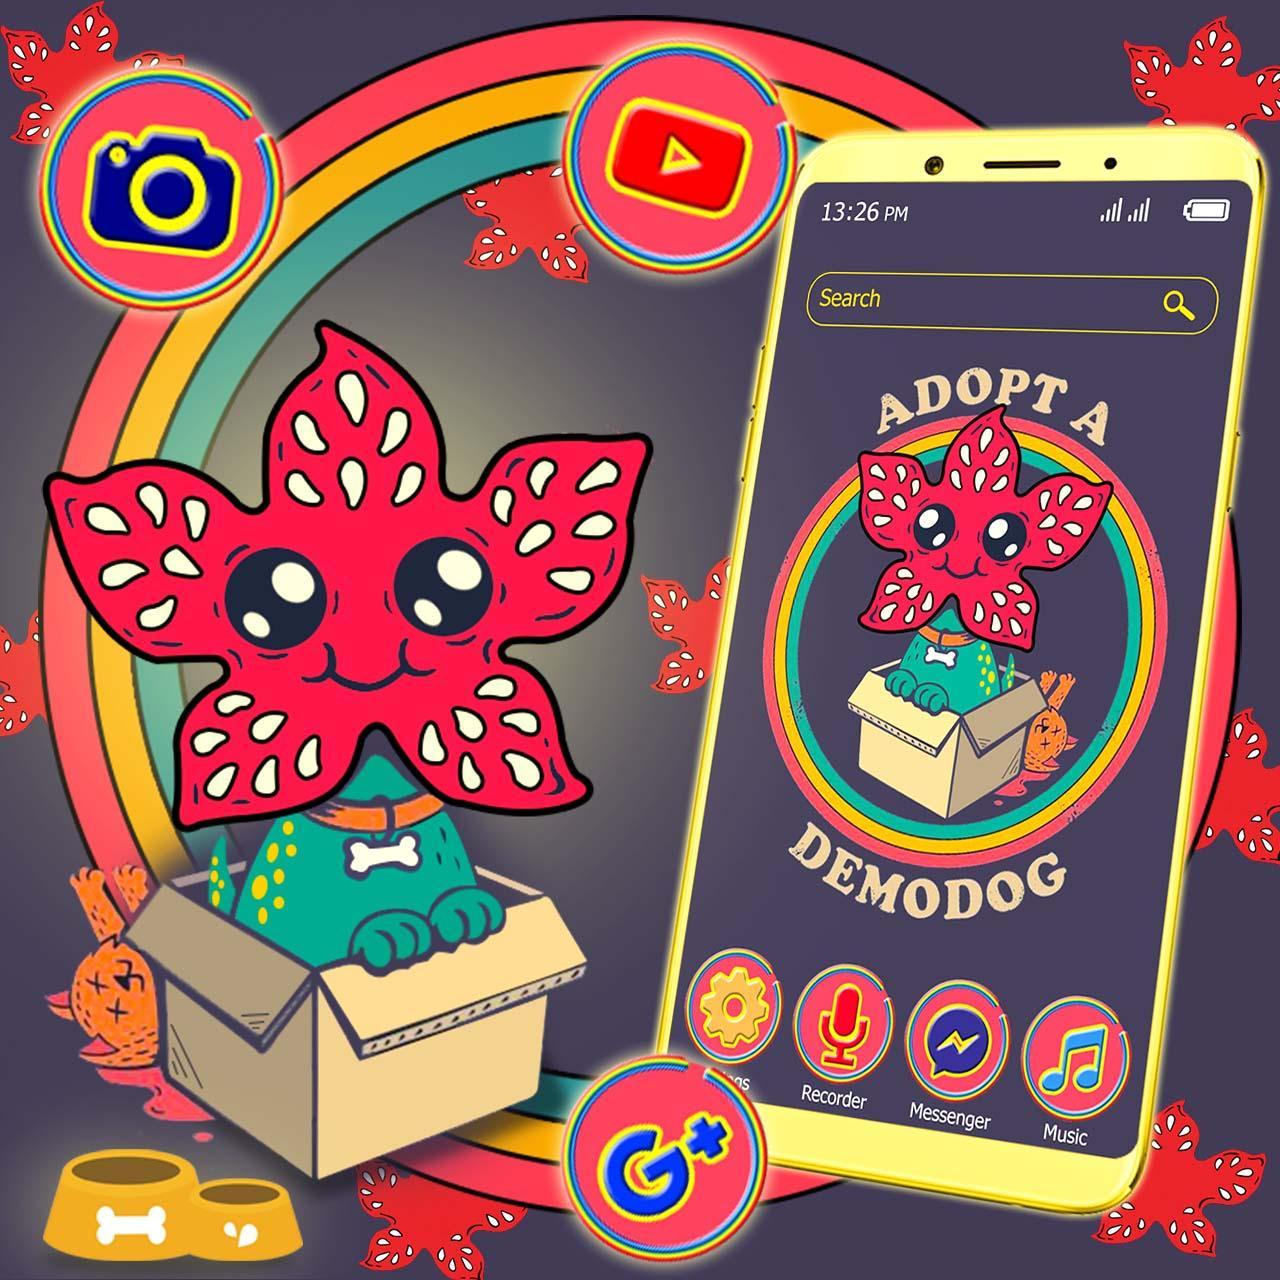 Strange Demodog Things Themes Live Wallpaper For Android